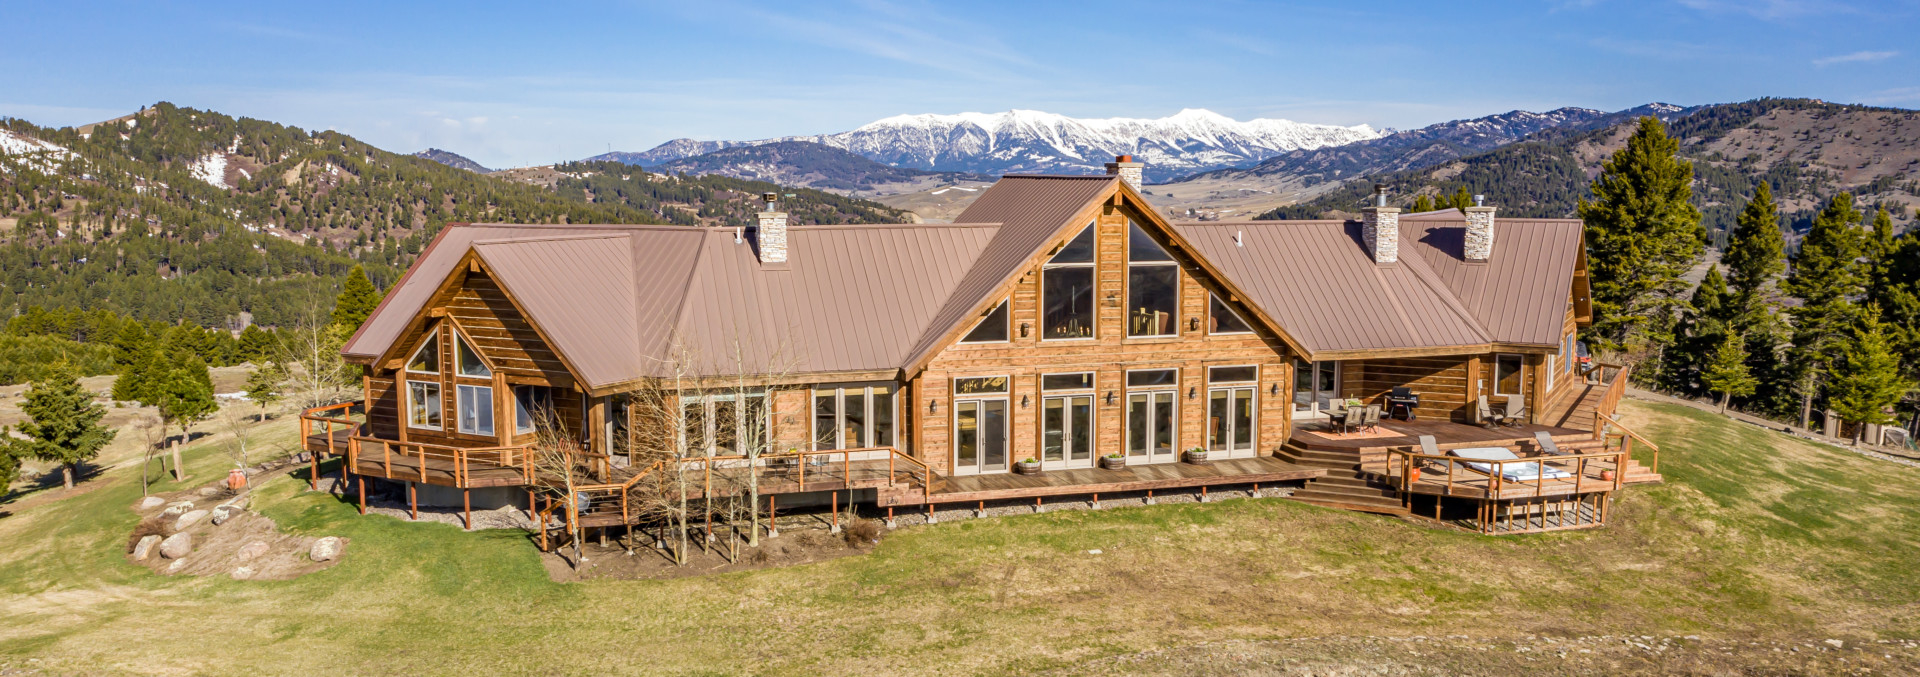 montana luxury ranch for sale sky ranch